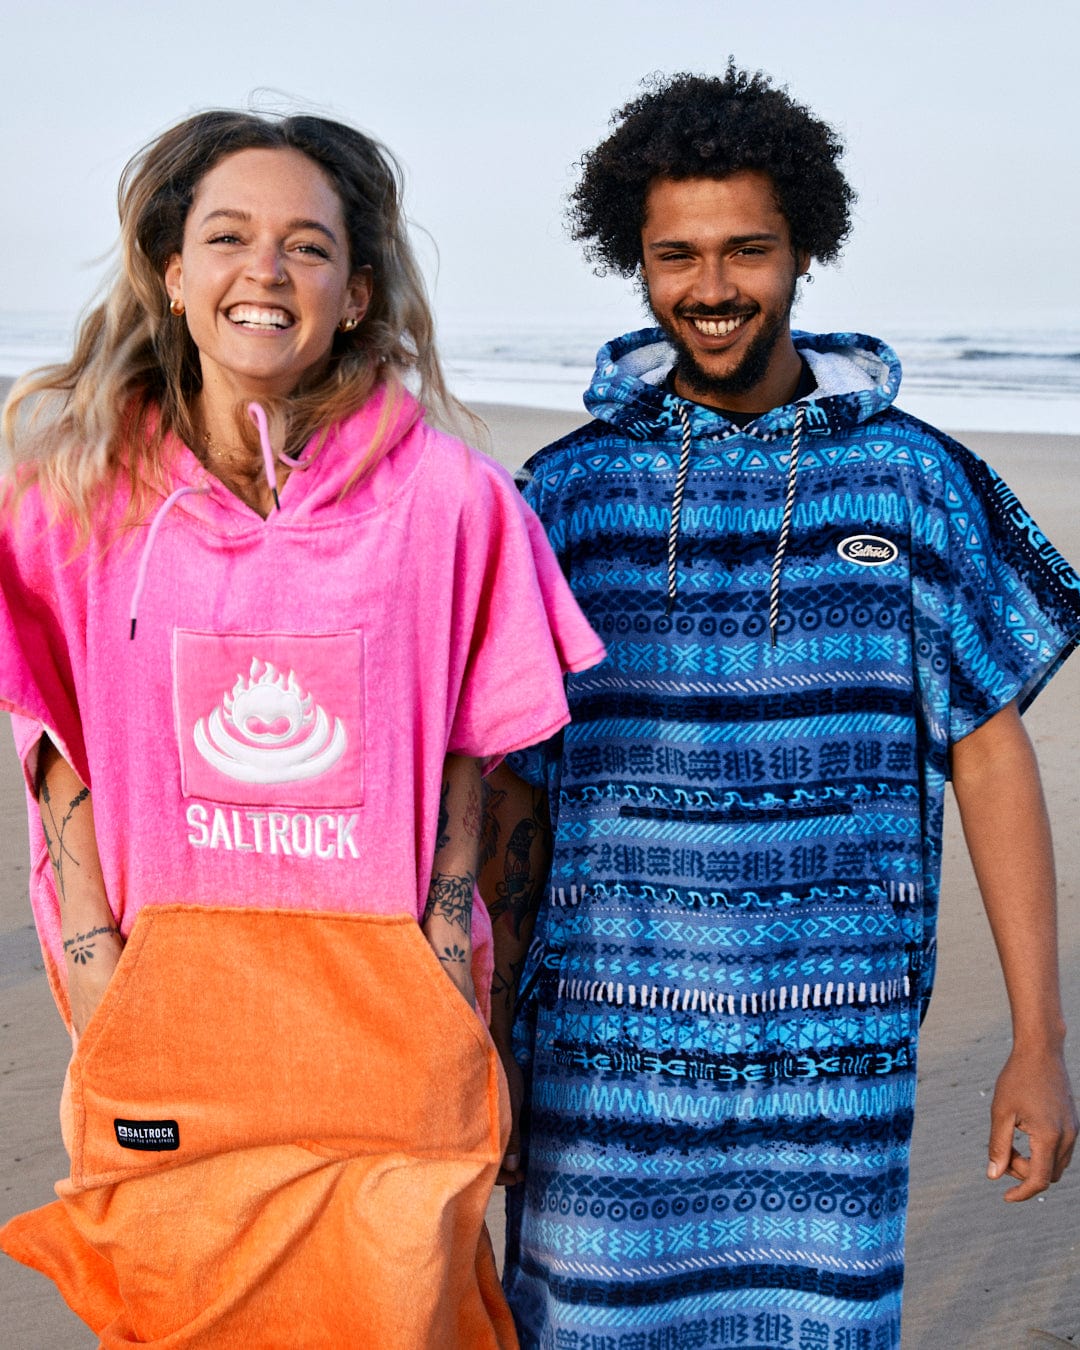 Two young adults smiling on a beach, one wearing a Saltrock bright pink Tropic Dip Changing Towel and the other in a Saltrock blue patterned hoodie made of 100% cotton, both casually dressed with visible tattoos.